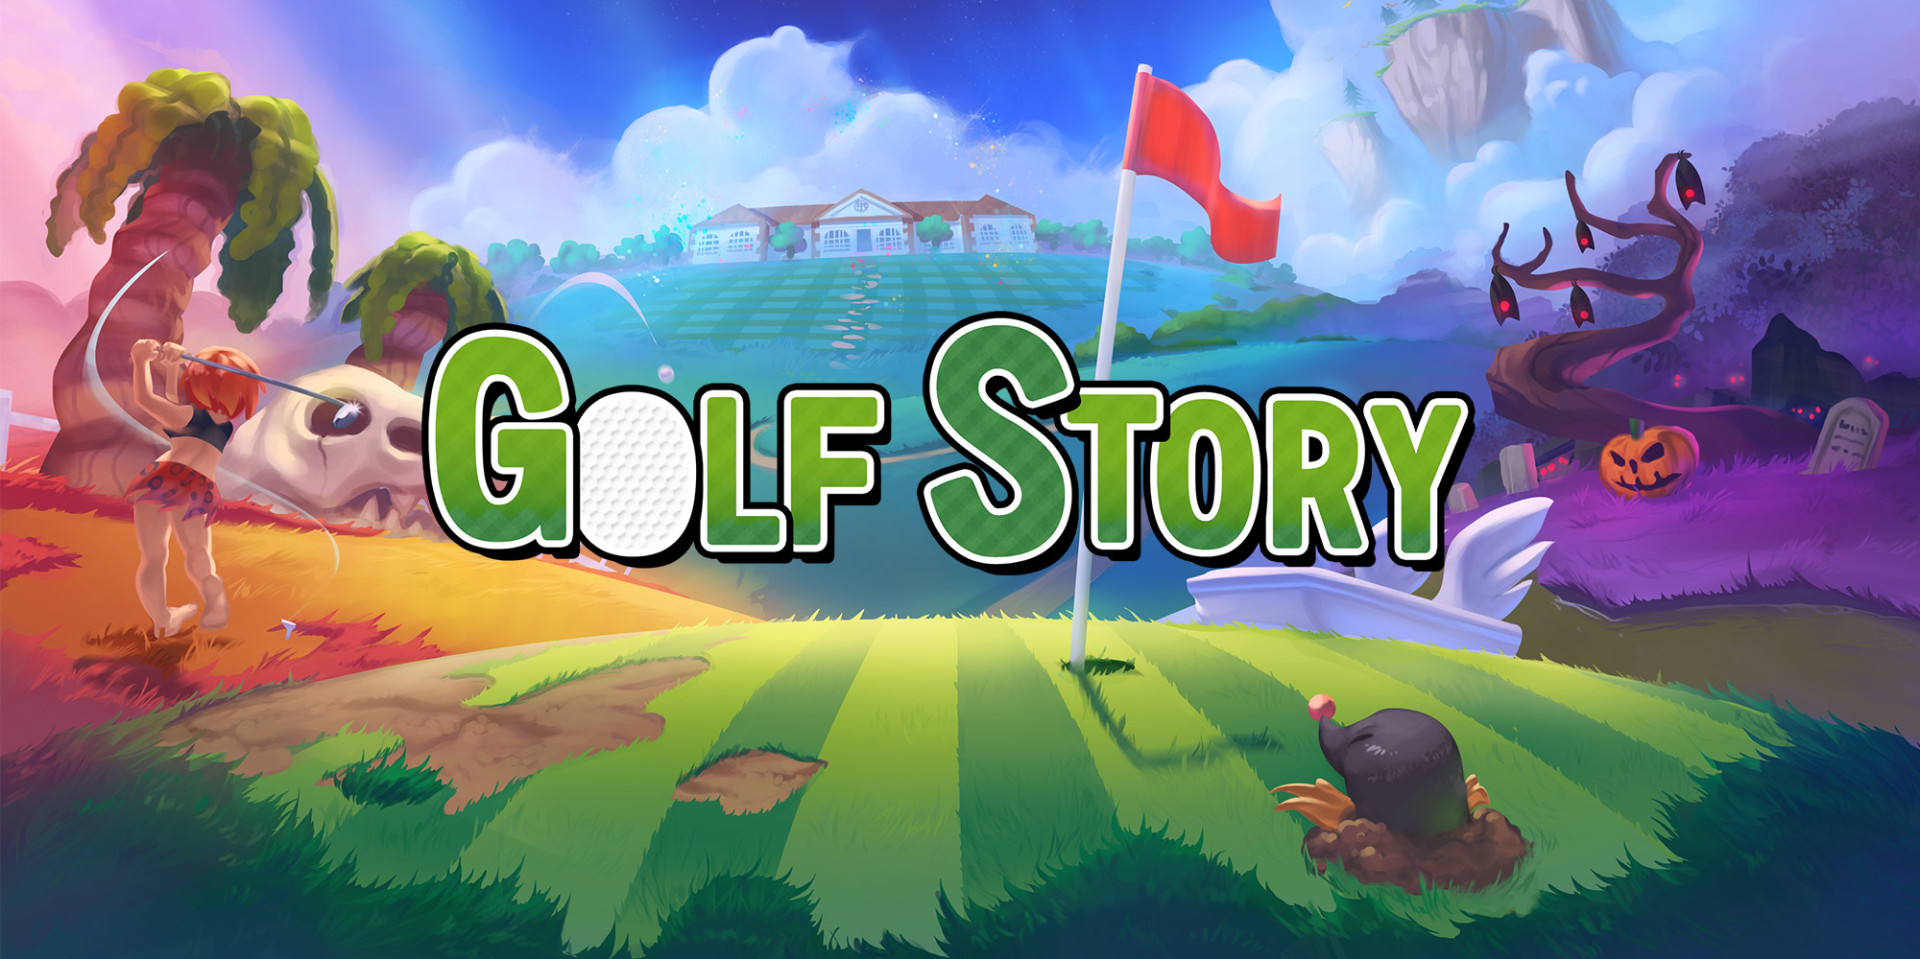 free download golf story